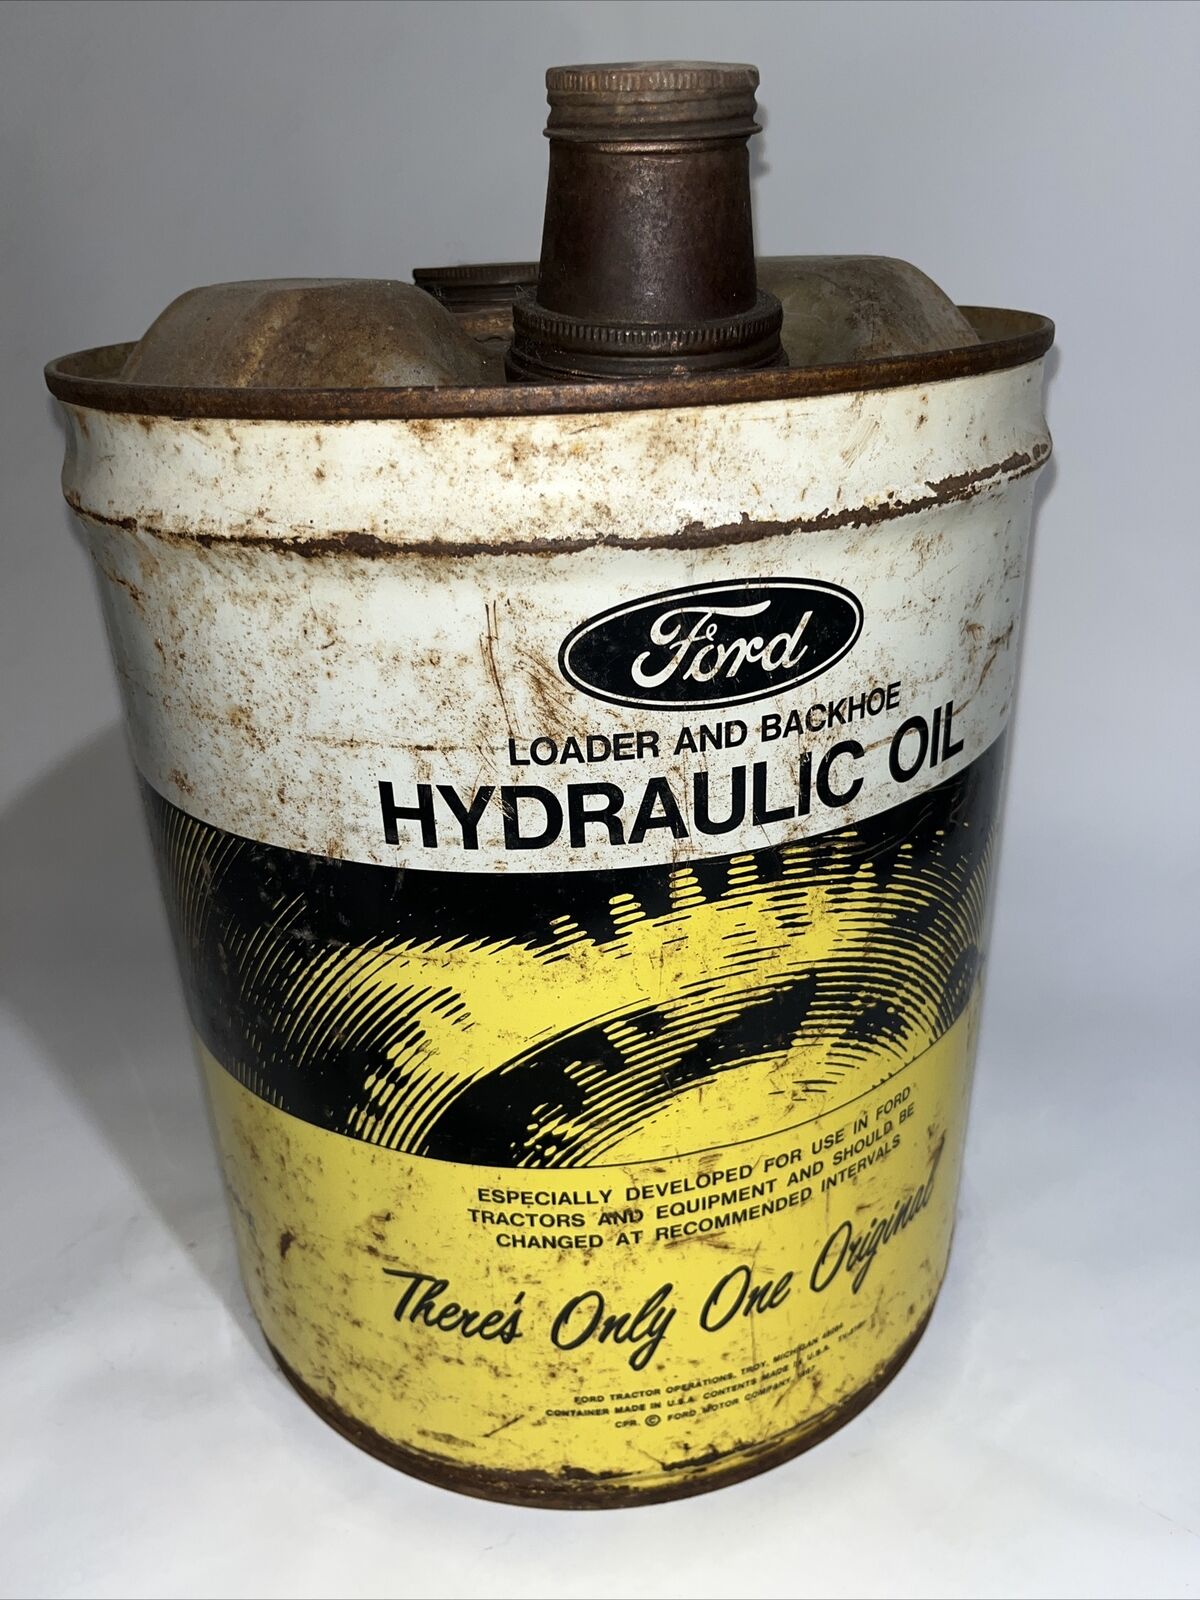 A 1967 Ford Loader And Backhoe Hydraulic Oil Can 5 U.S. Gallons M-2C48-A